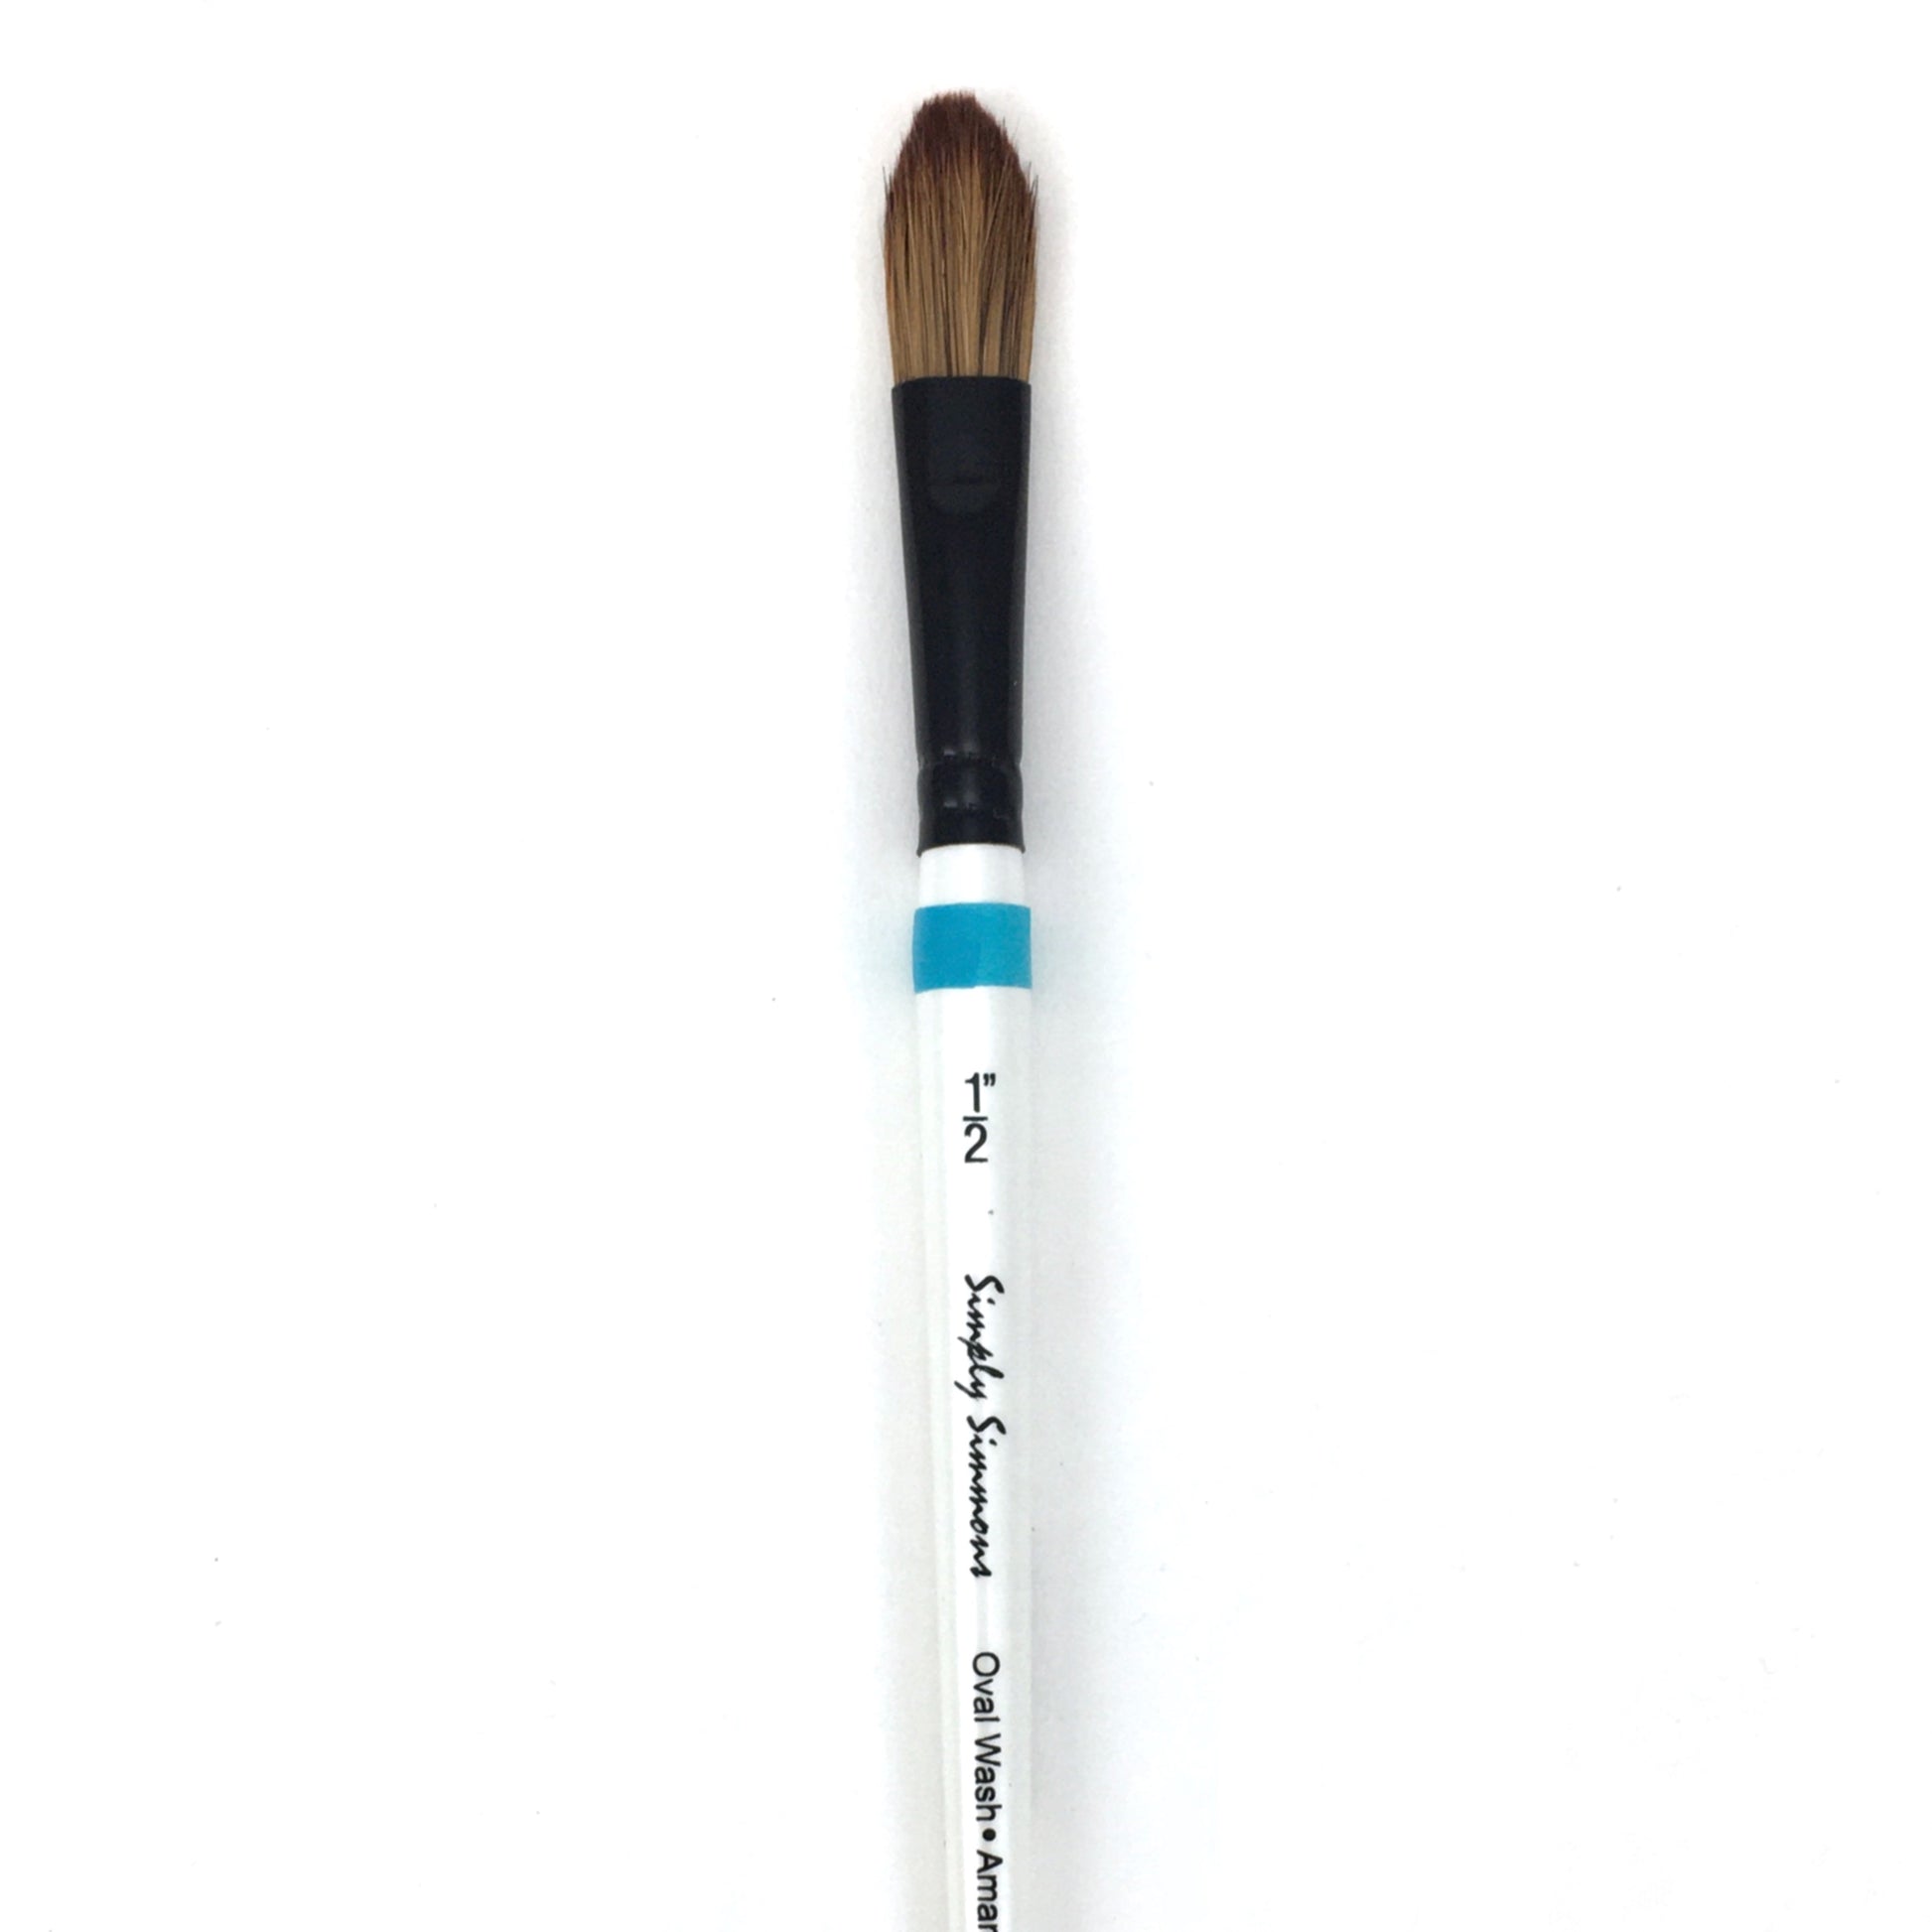 Simply Simmons Watercolor Brush - Short Handle - Oval Wash / - 1/2 inches / - natural by Robert Simmons - K. A. Artist Shop